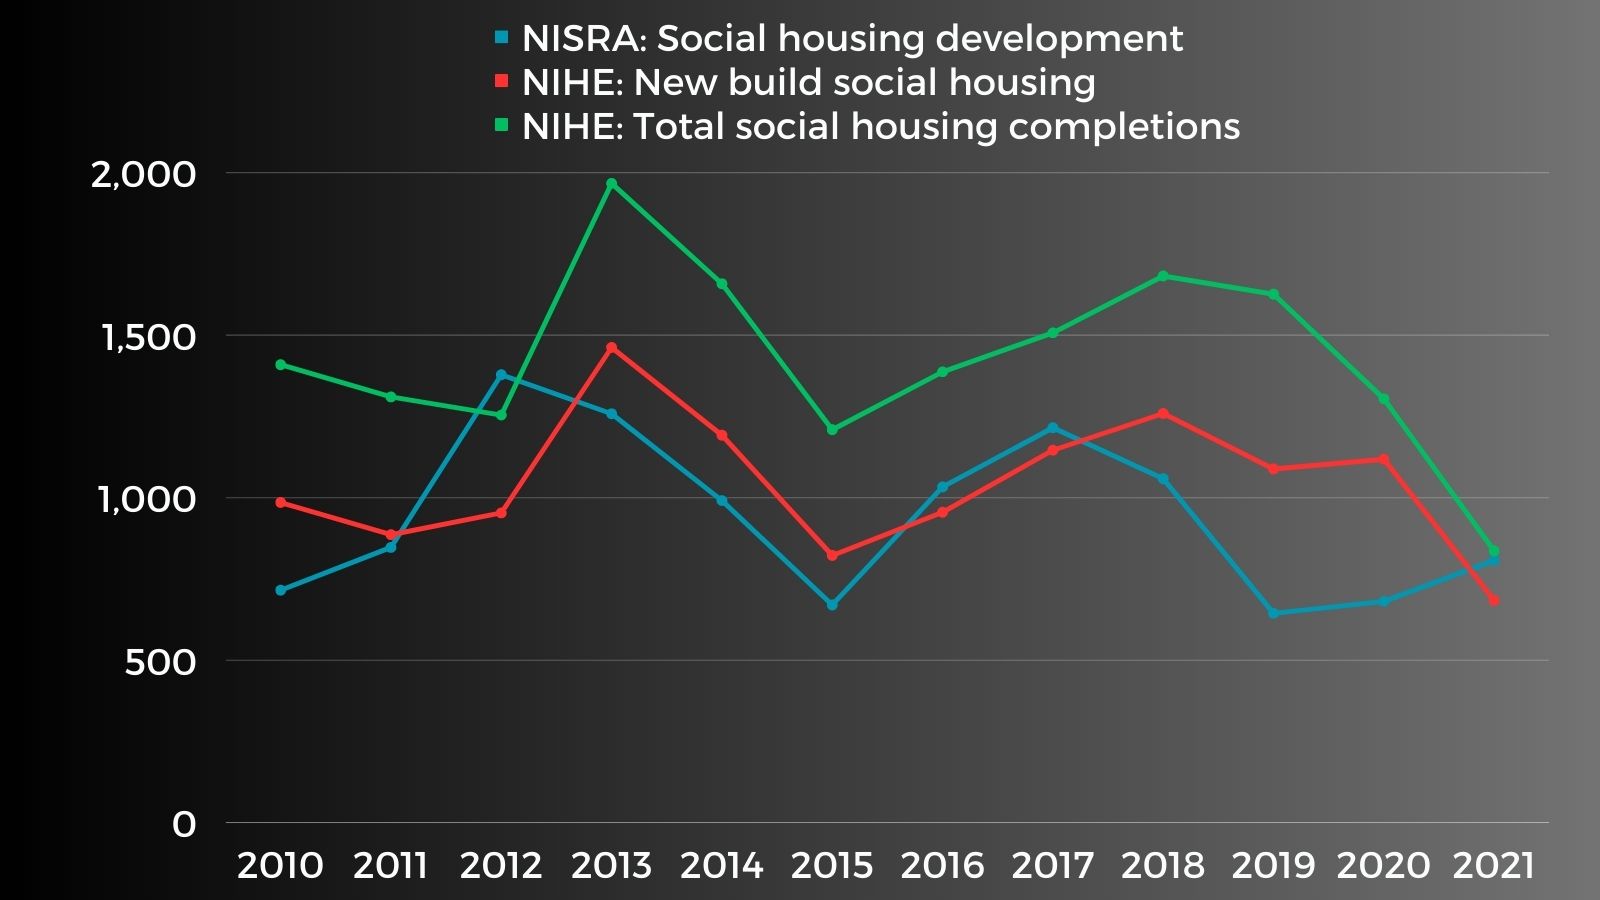 A stacked line chart portraying the discrepancies between the Housing Executive and NISRA statistics on social housing development